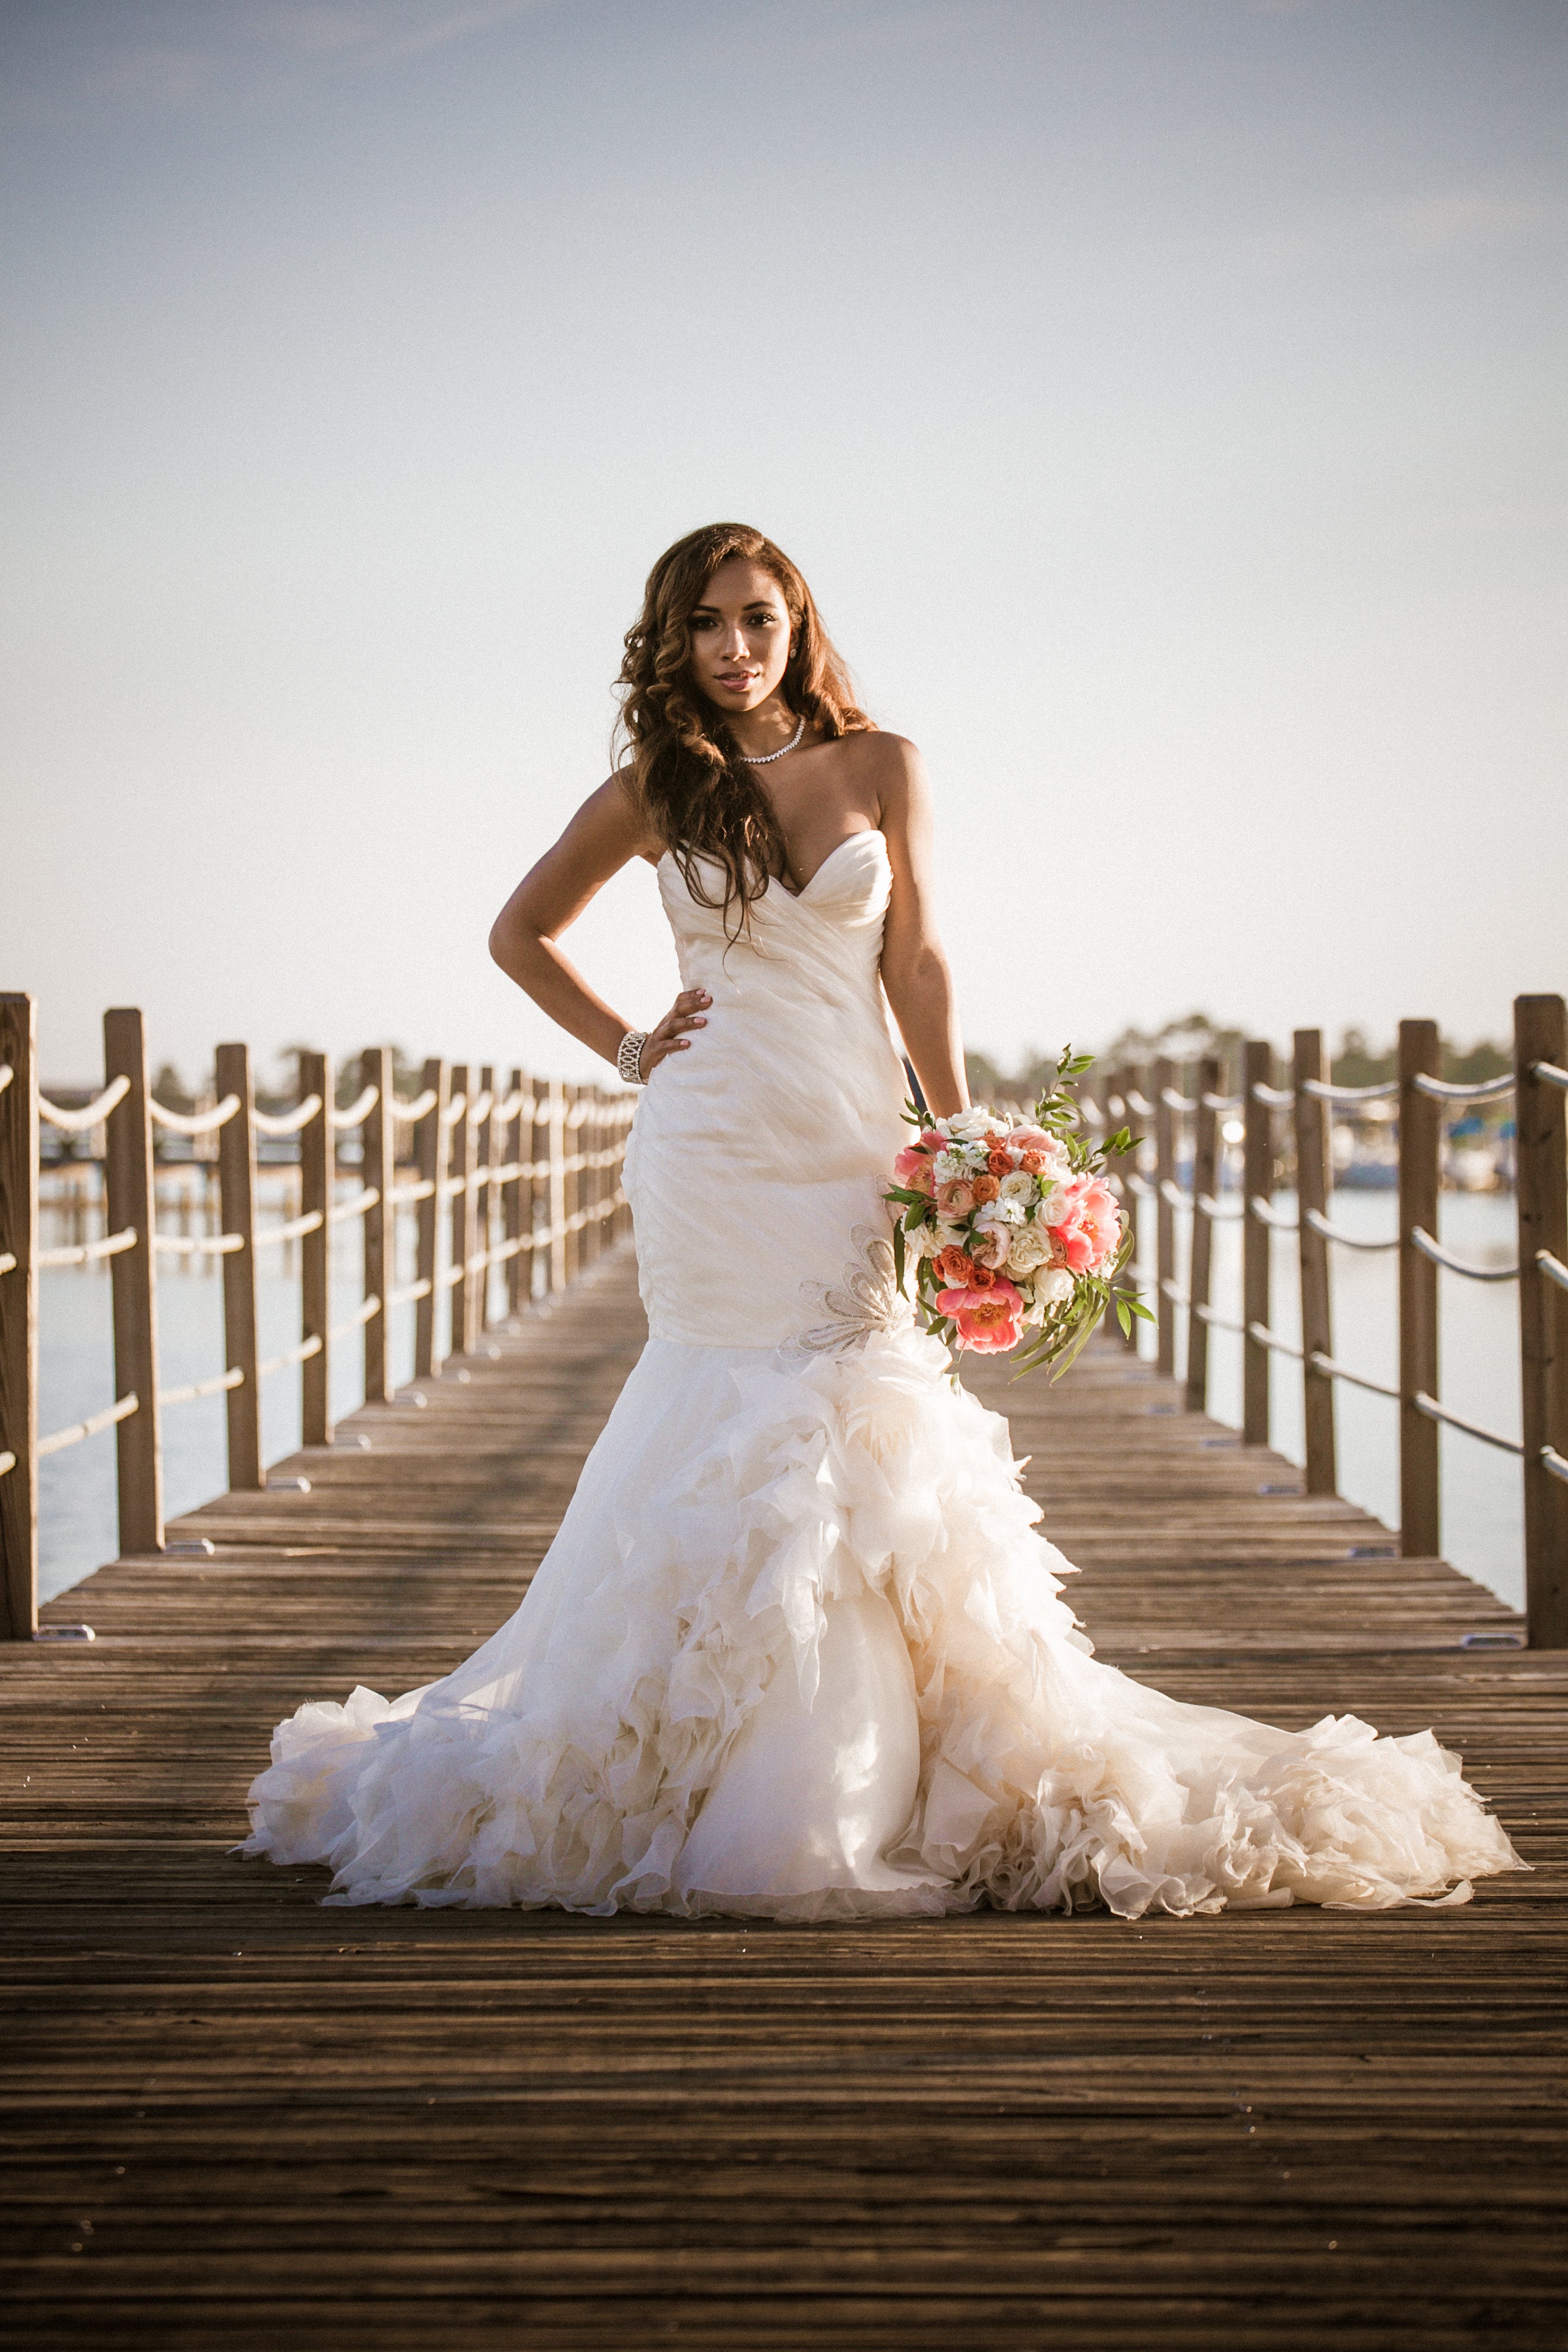 Bridal Bliss: Maurice and Angelina's Oceanfront Wedding Was Absolute Beach Chic
